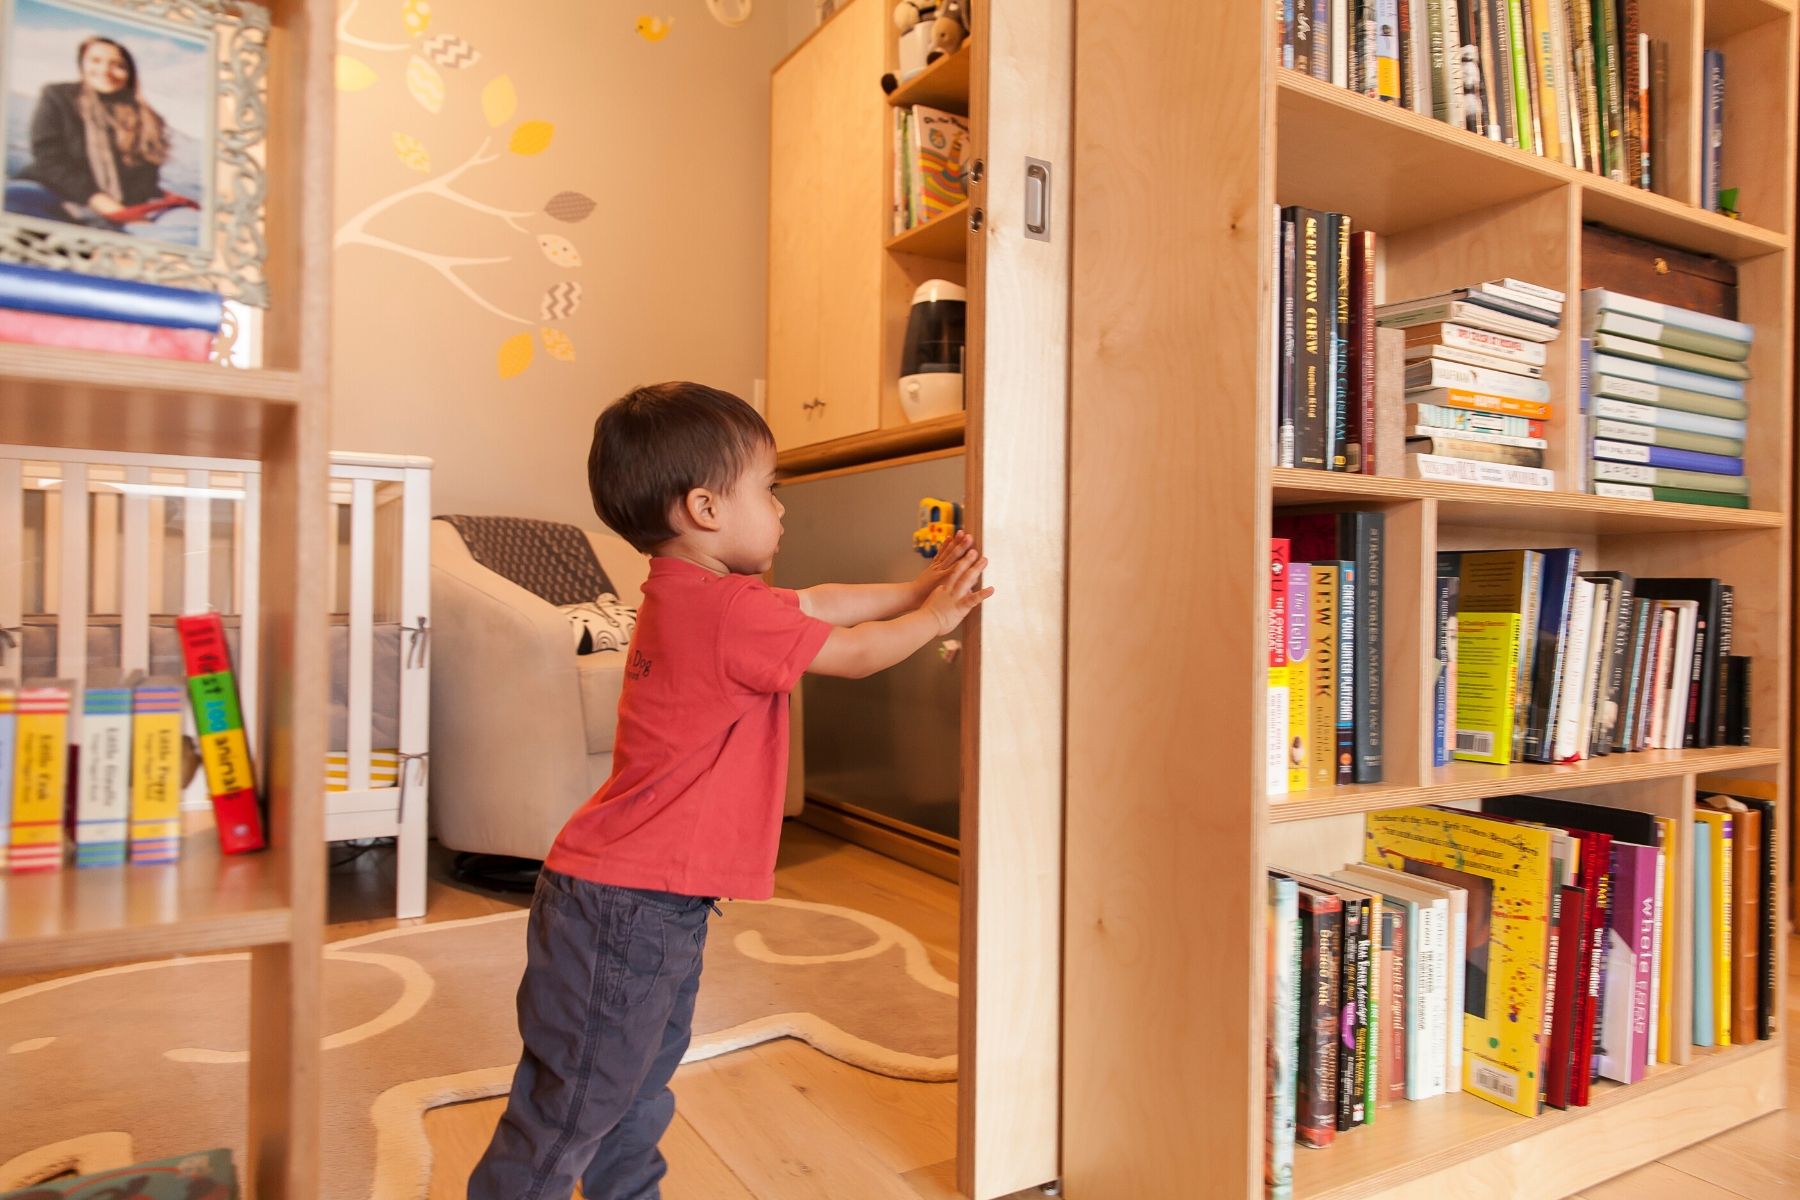 Toddler reaches for book on shelf, cozy room, yellow tree mural.